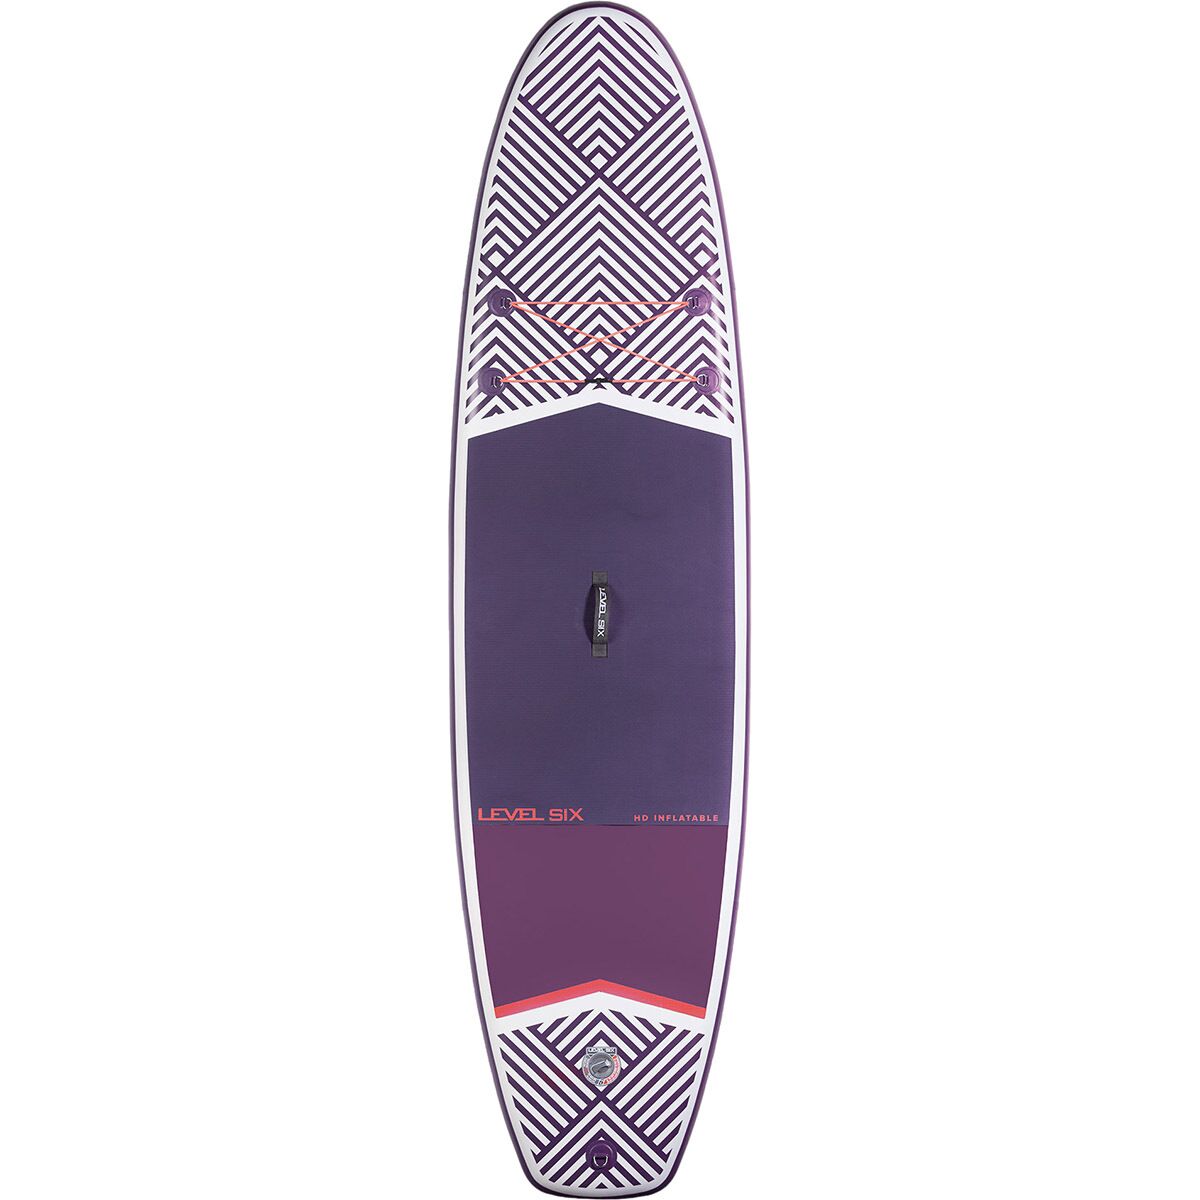 Level 6 HD Inflatable SUP Board Package